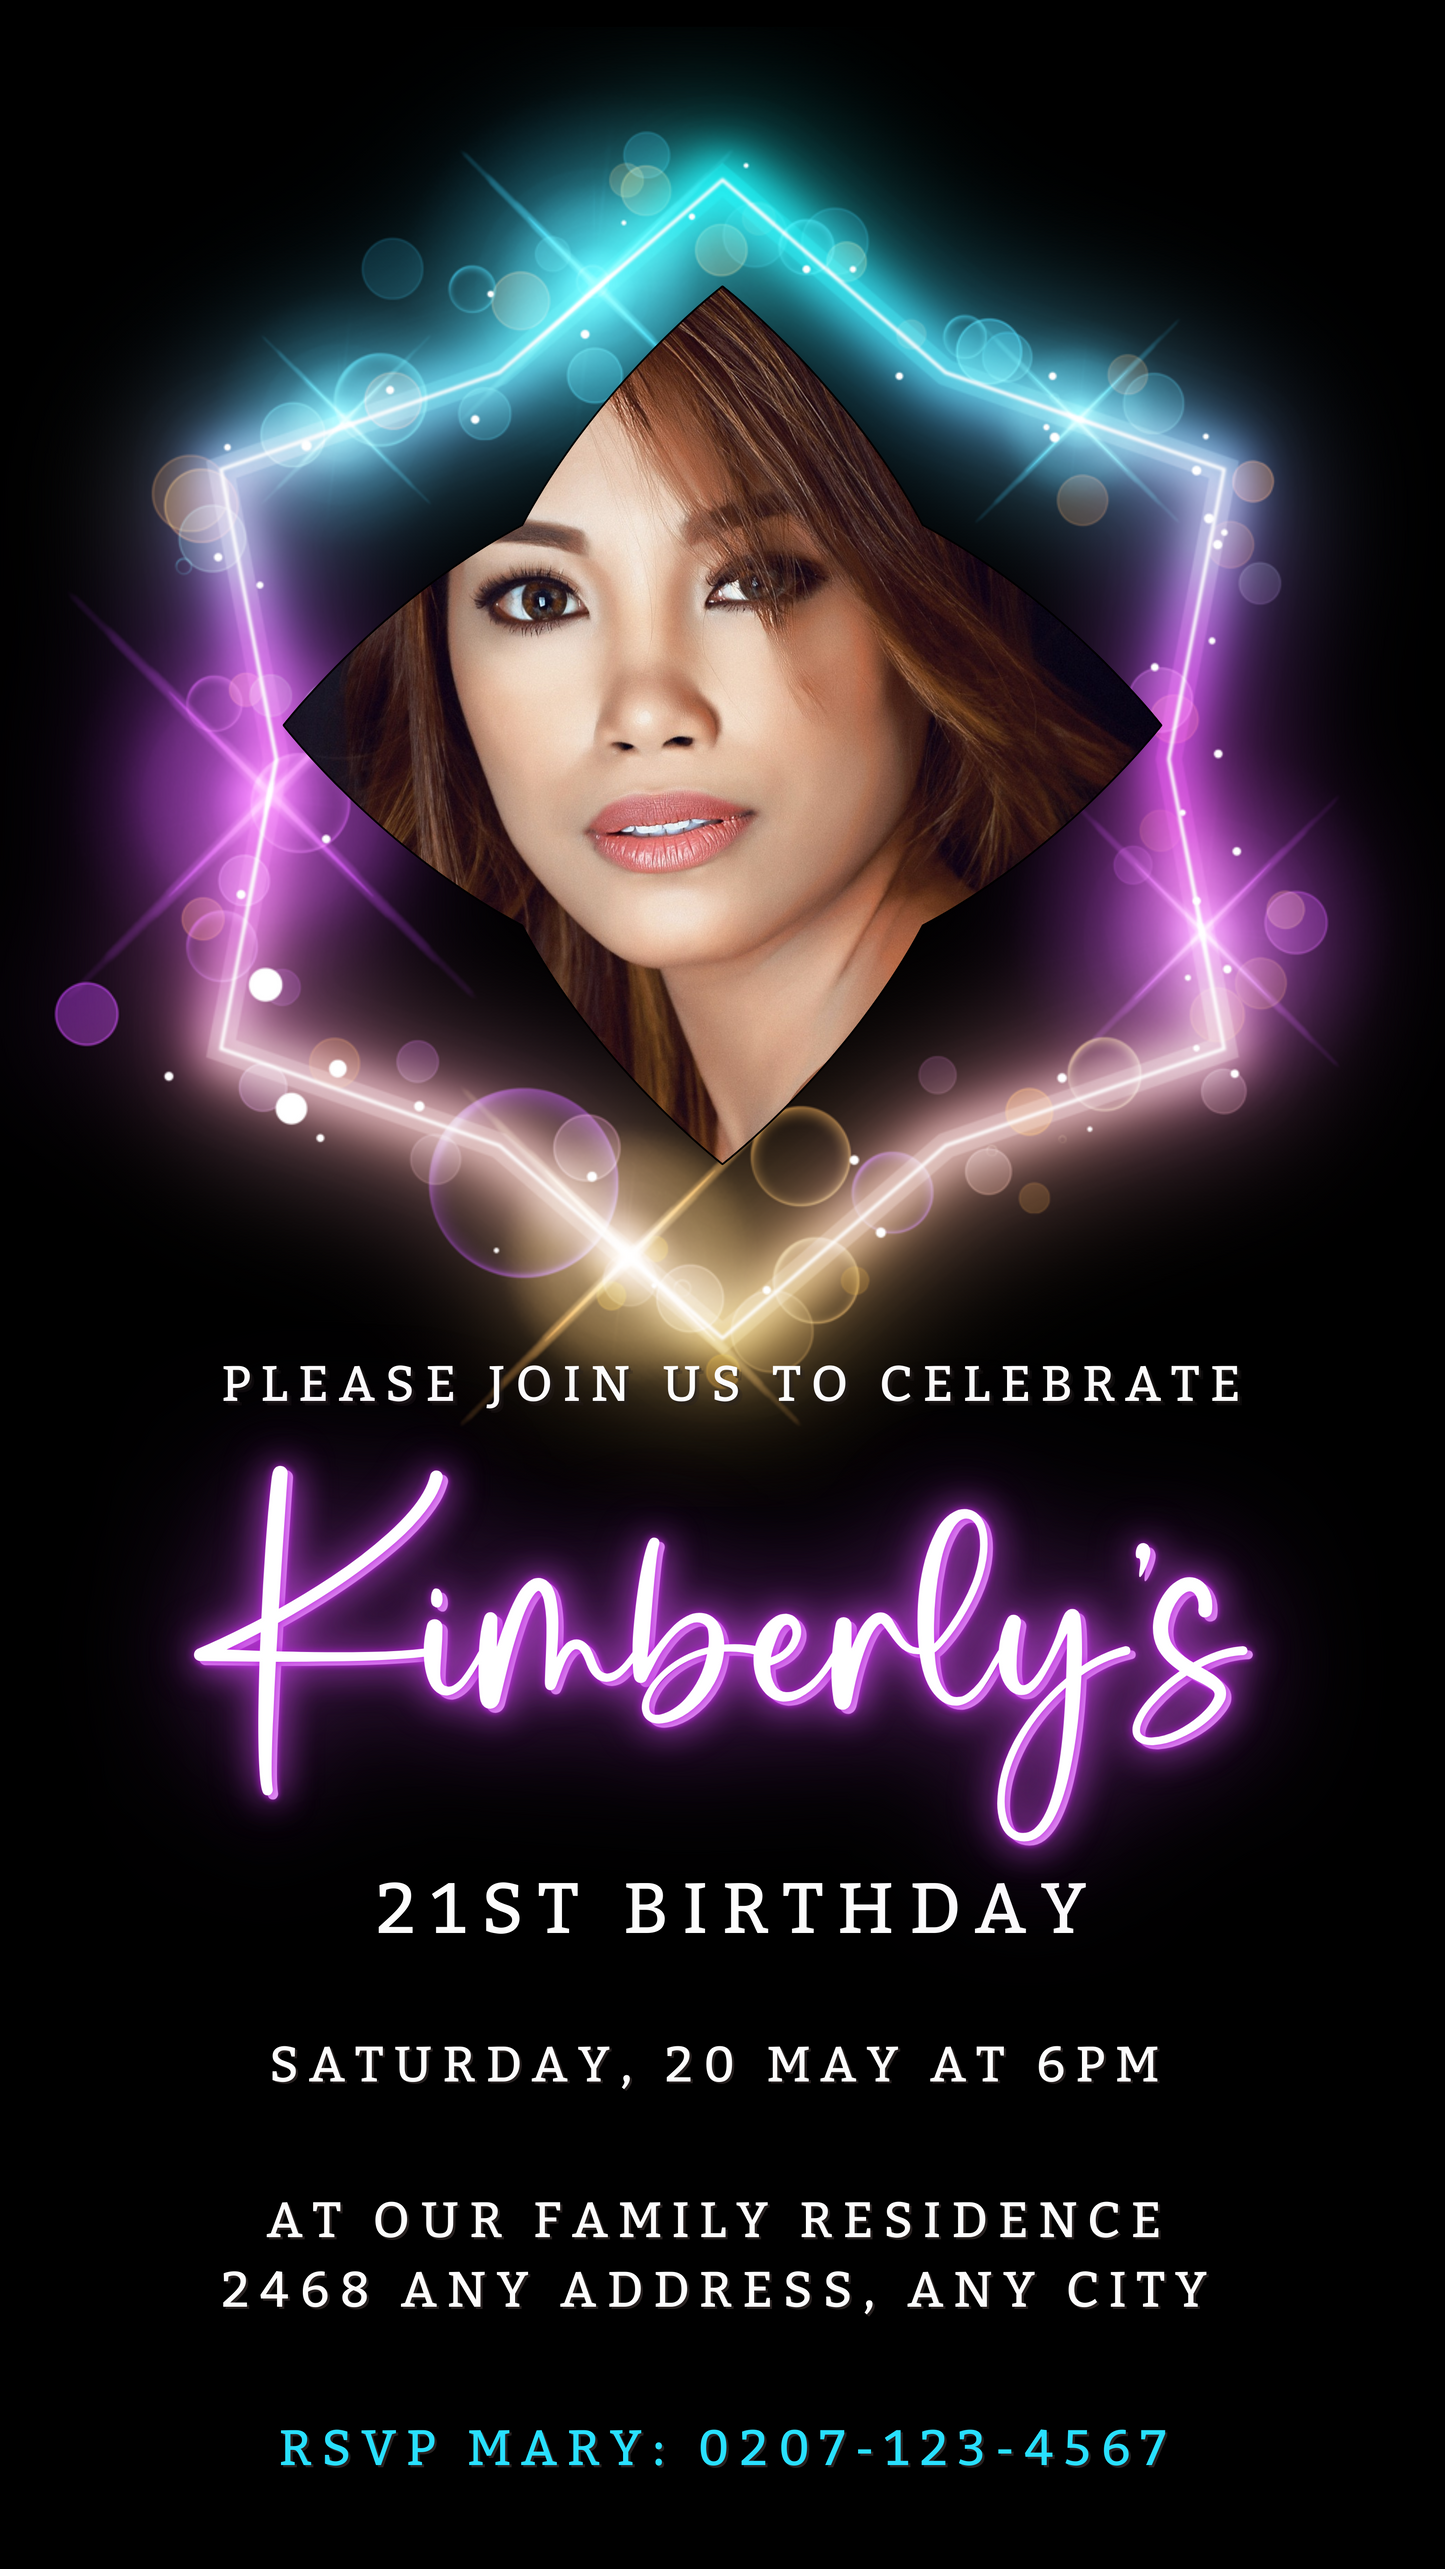 Woman's face in a diamond frame with neon lights, representing the Colourful Neon Black Pink Birthday Party Evite, customizable via Canva for digital invitations.